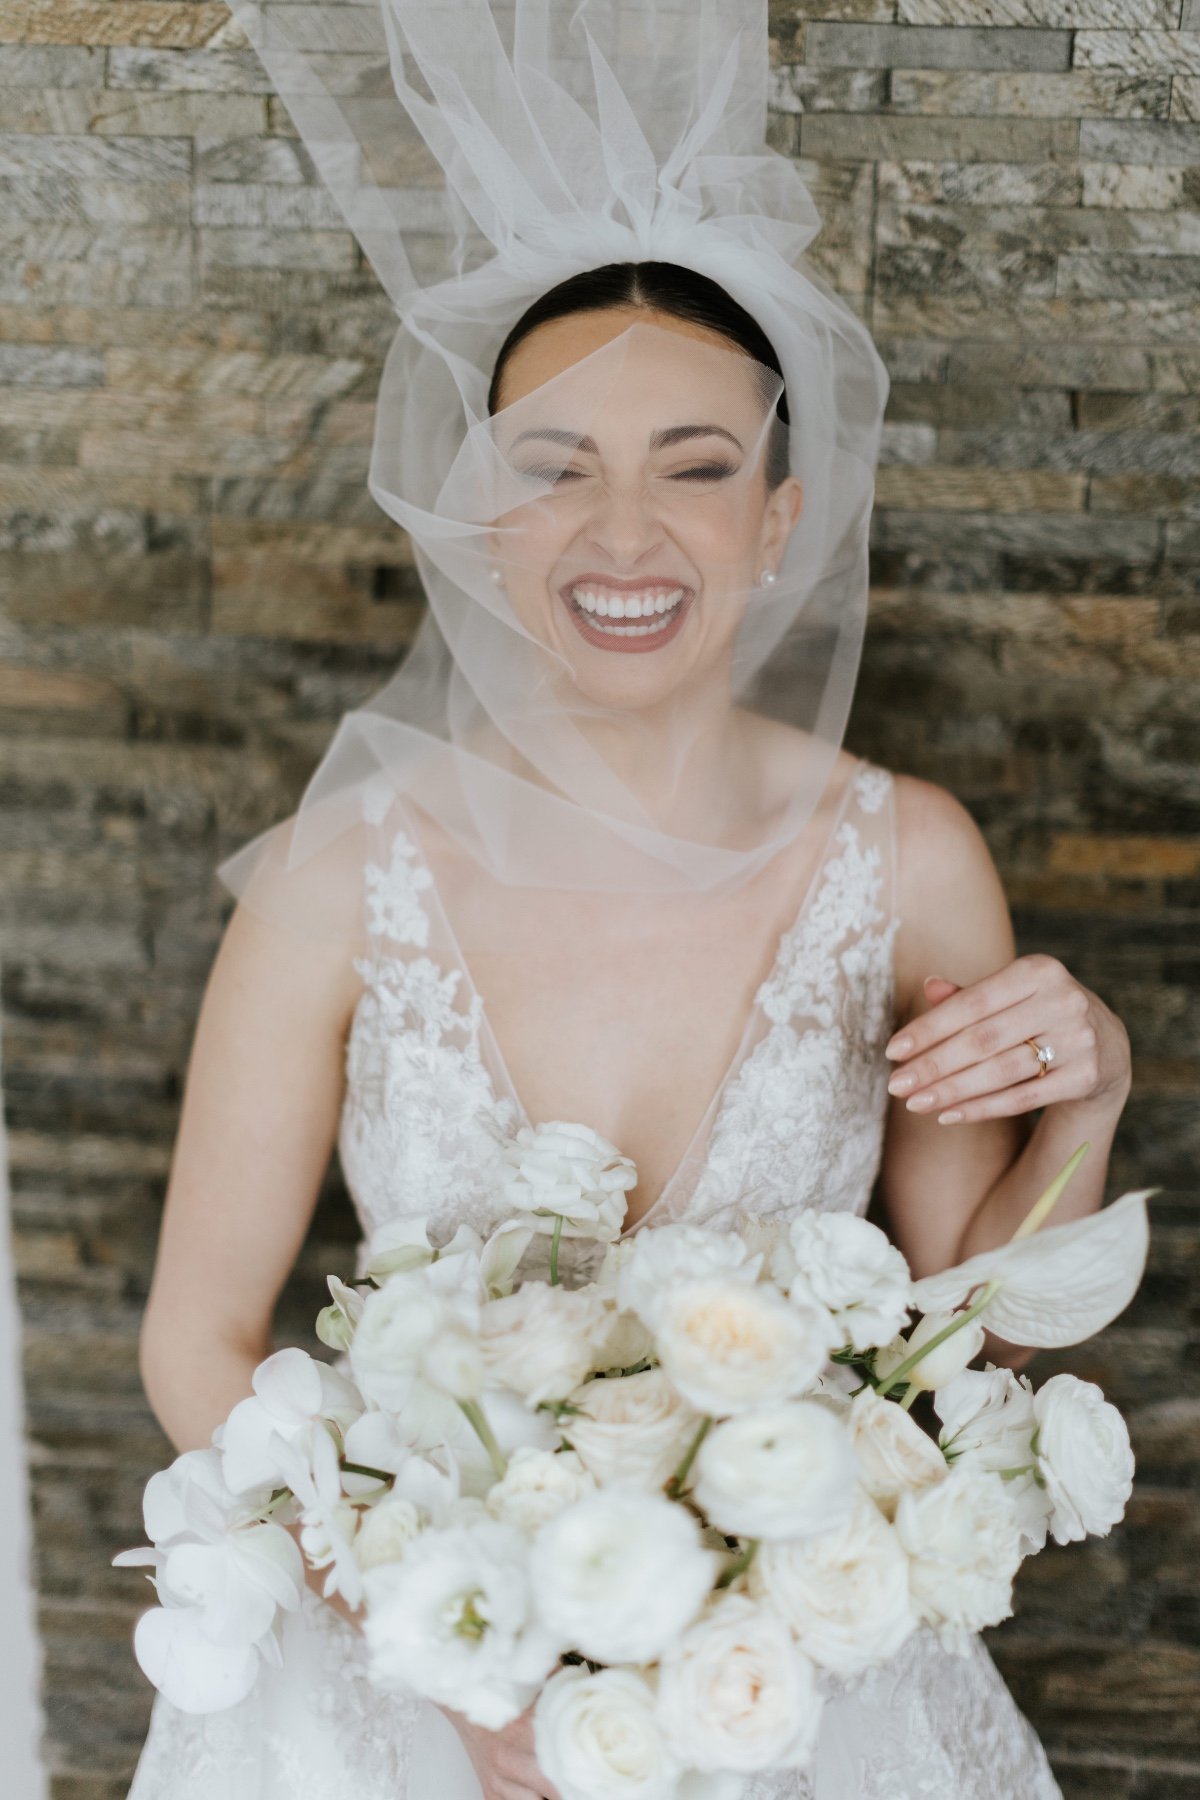 Portrait of bride laughing and wearing veil over her face